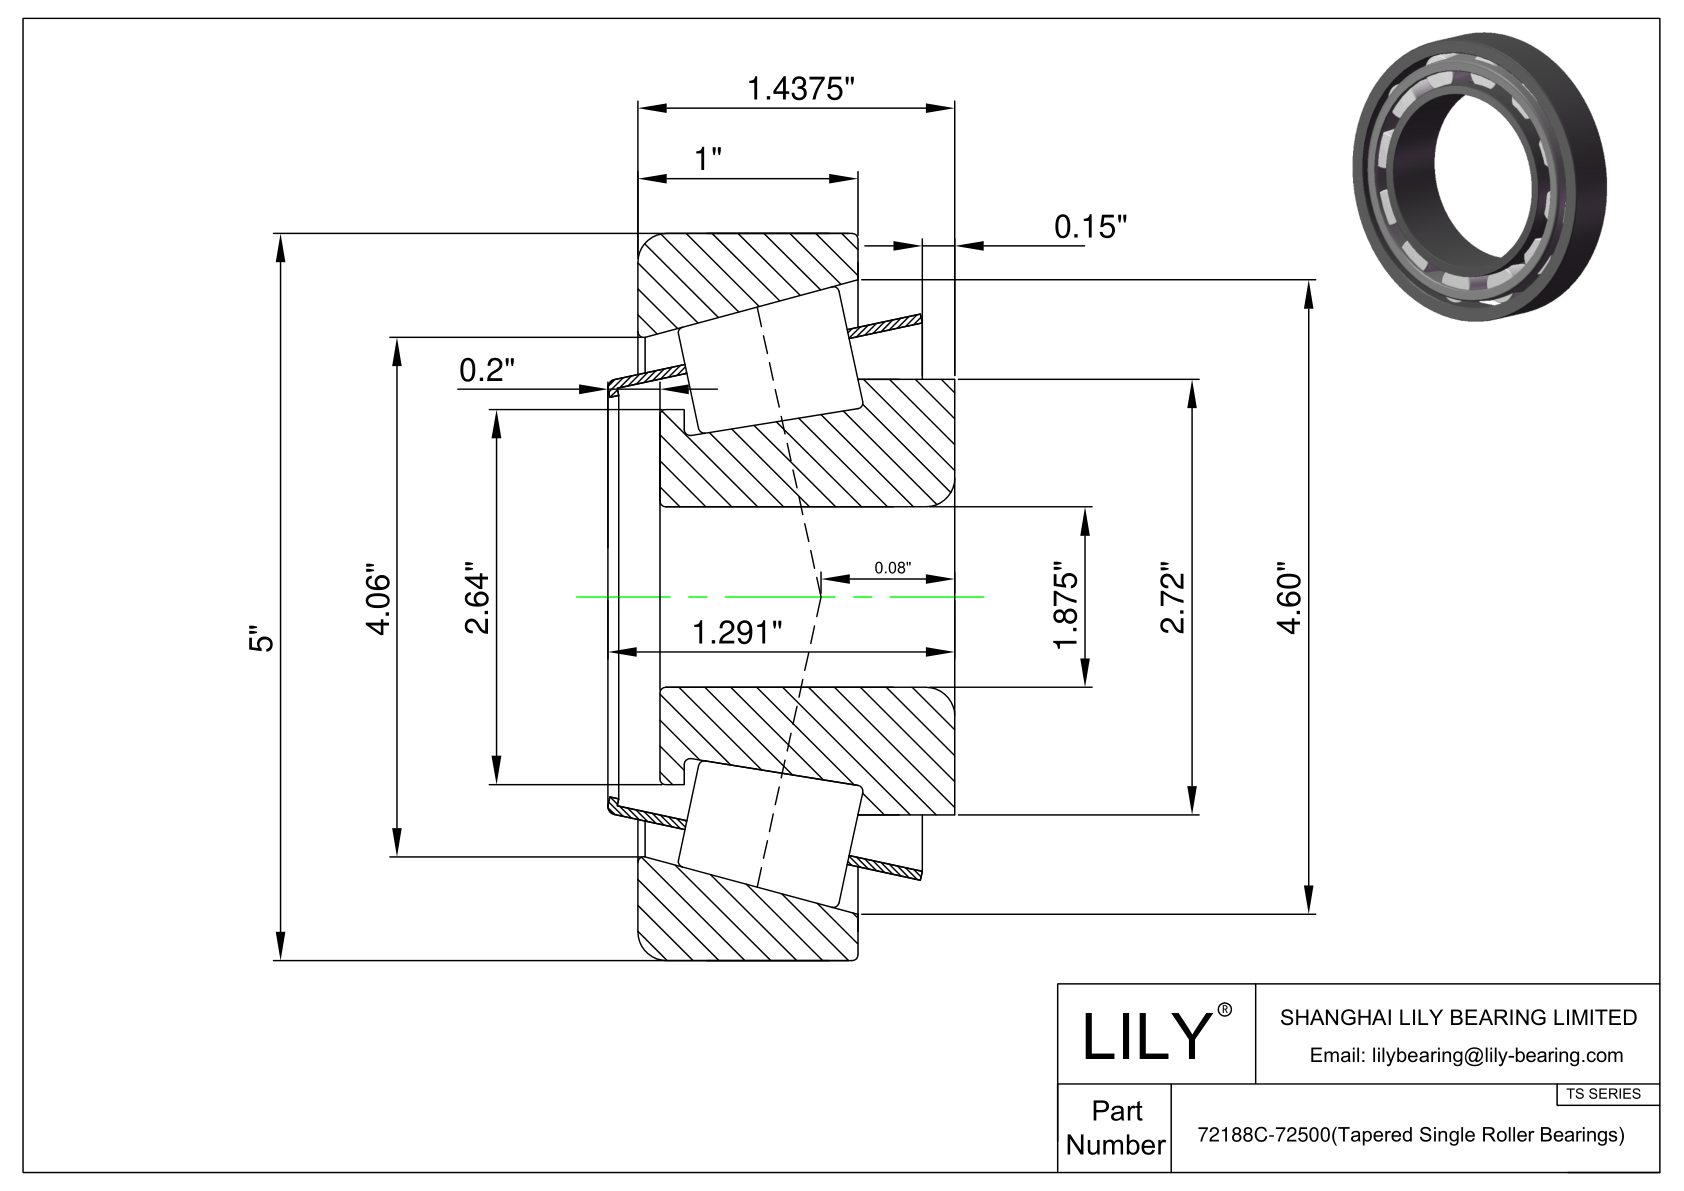 72188C-72500 TS (Tapered Single Roller Bearings) (Imperial) cad drawing